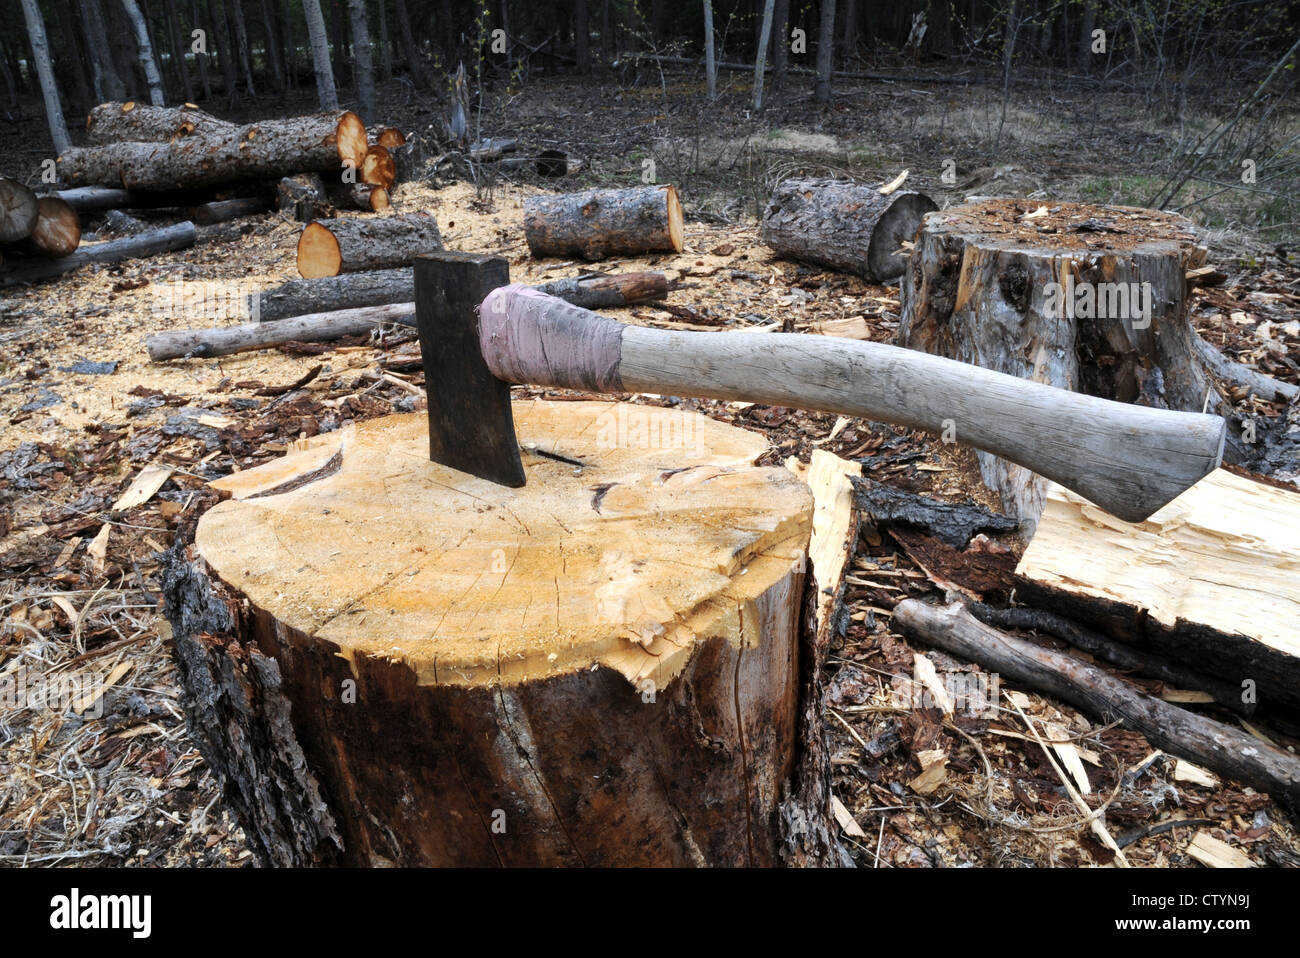 A large wood cutting axe, or splitting maul, resting on a chopping block with nearby logs in the forest near Whitehorse, southern Yukon, Canada. Stock Photo